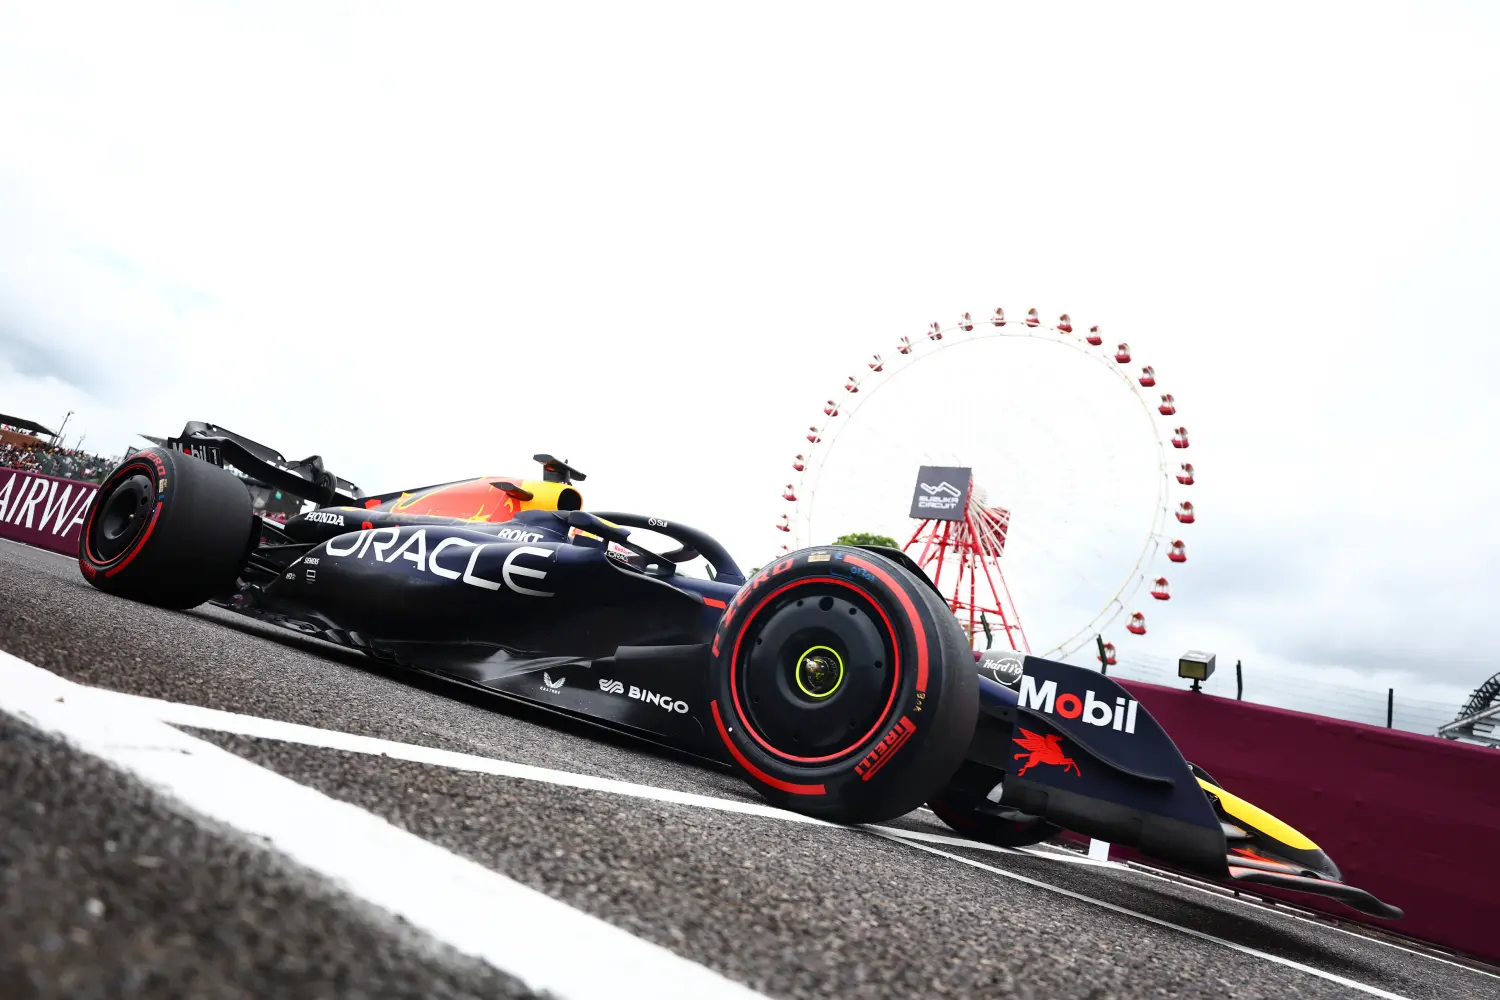 Max Verstappen - Oracle Red Bull Racing / © Getty Images / Red Bull Content Pool